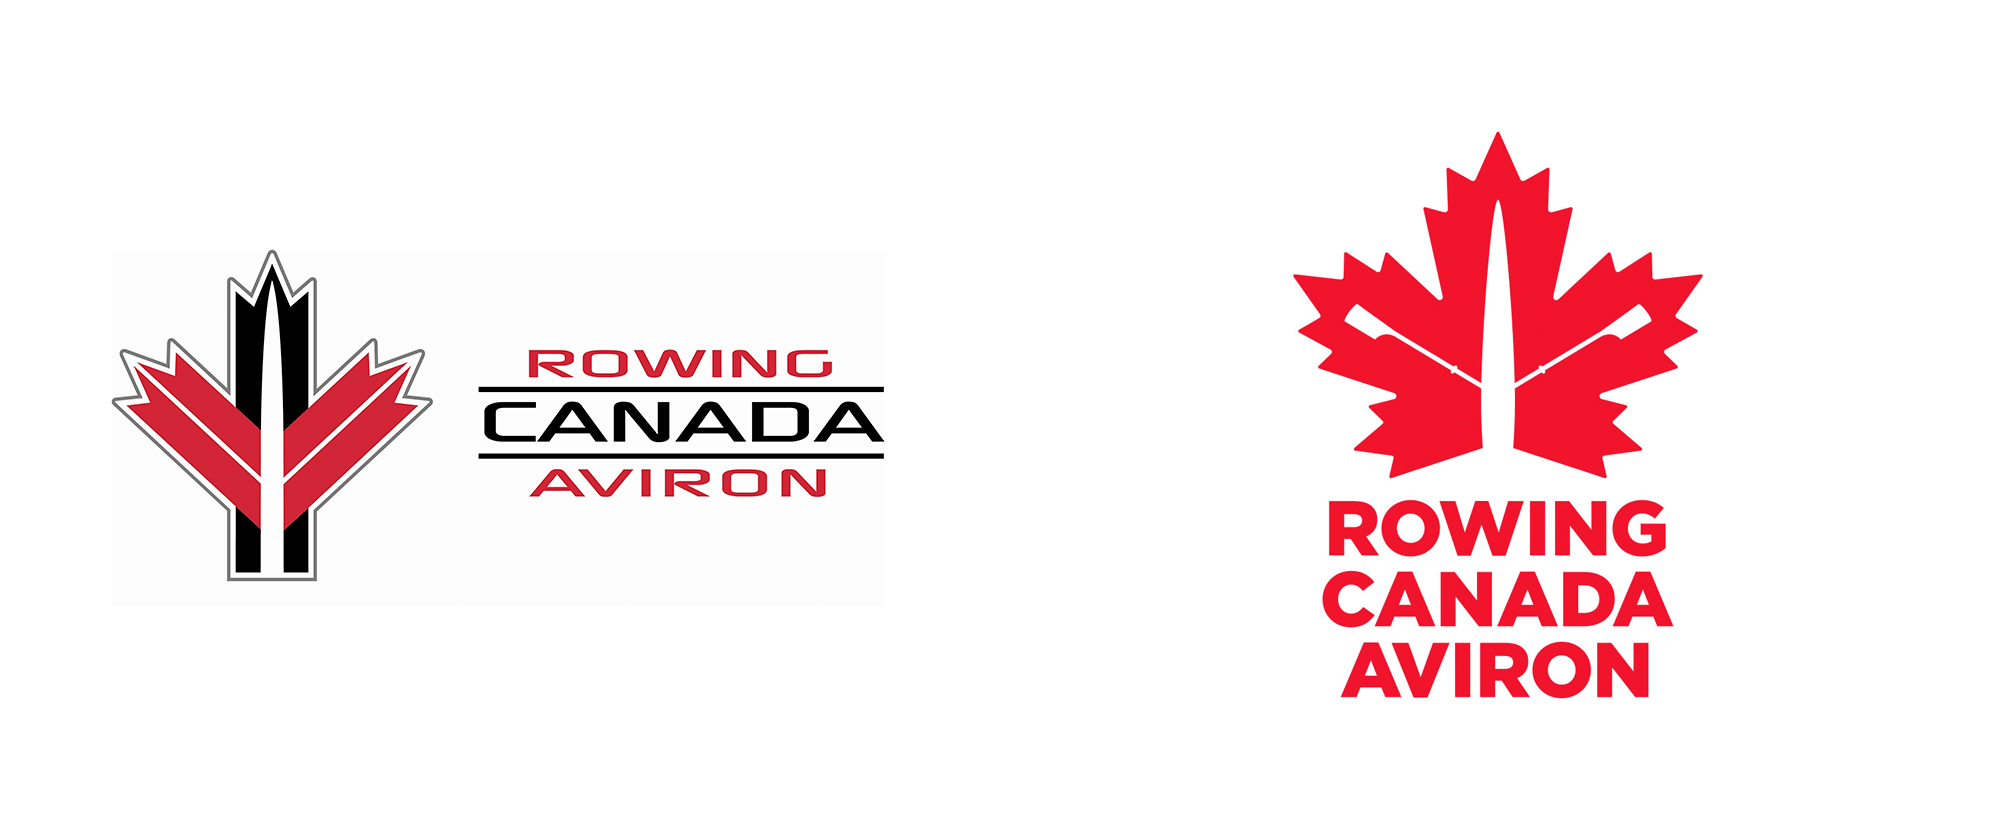 Red Leaf Logo - Brand New: New Logo for Rowing Canada Aviron